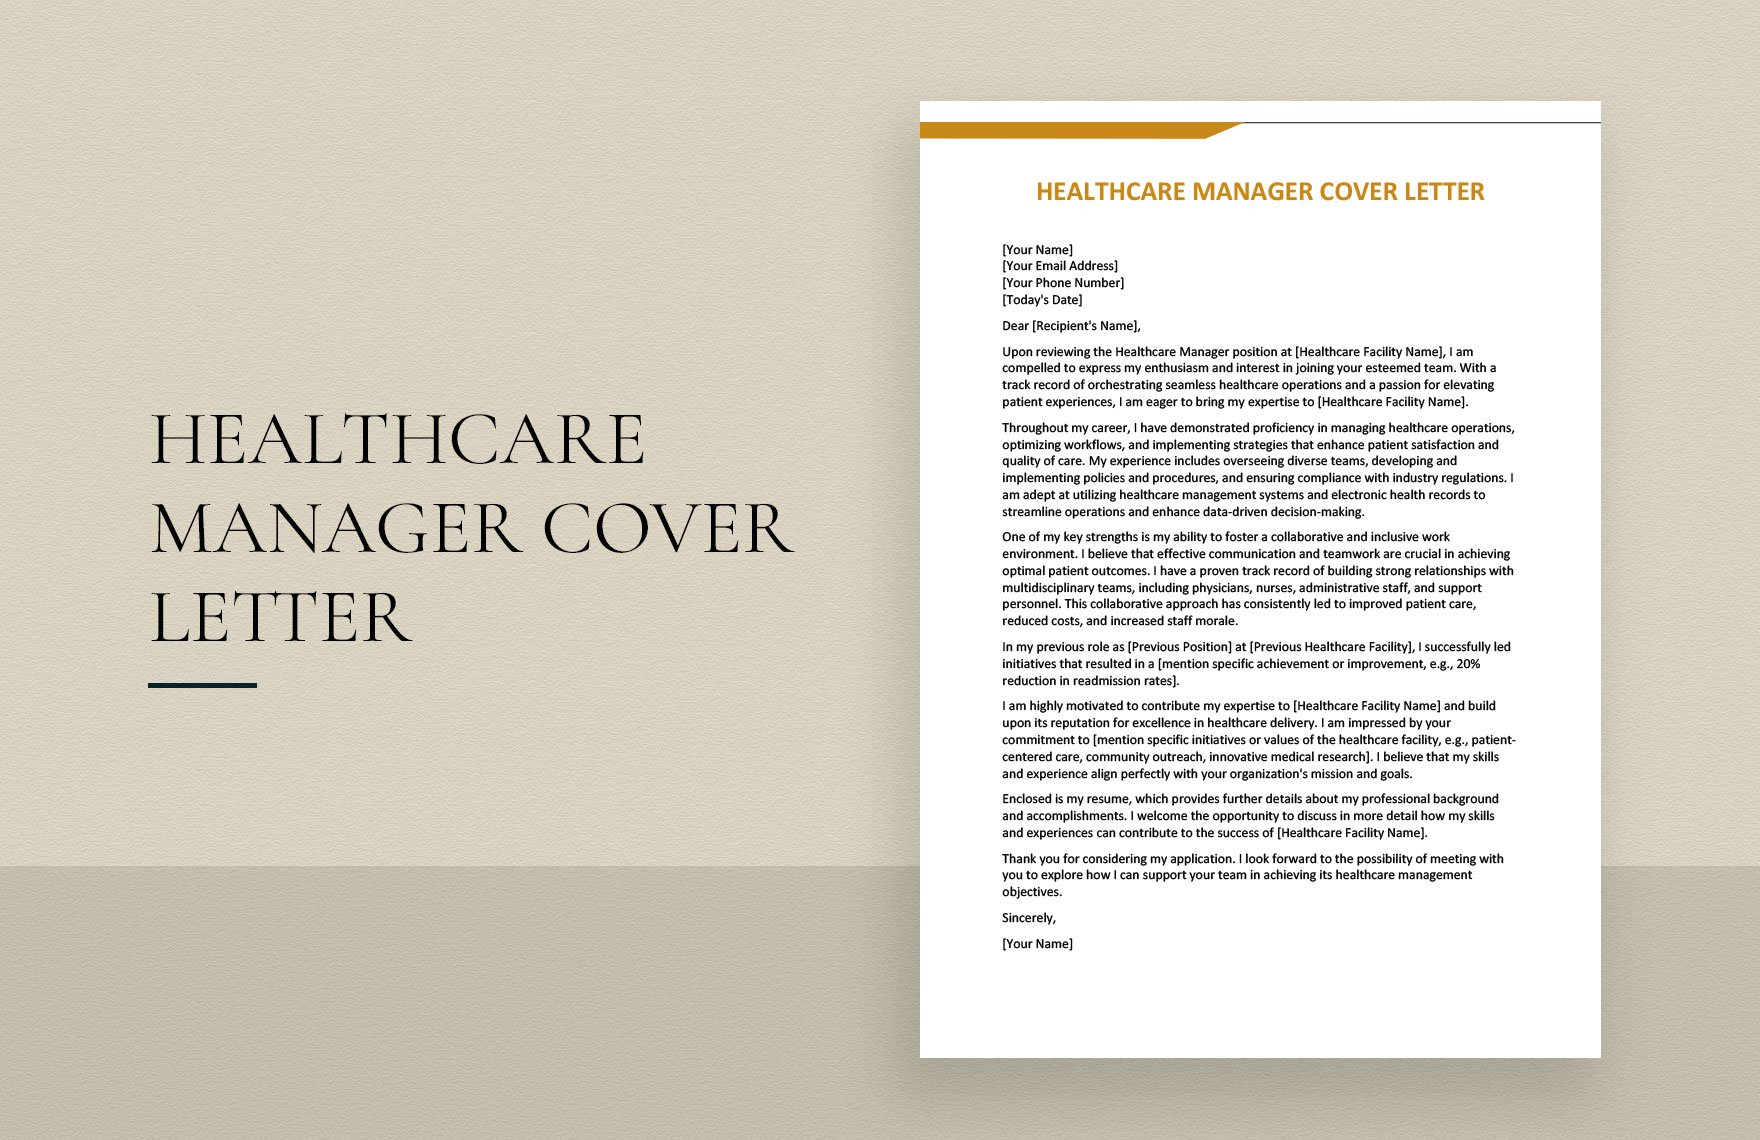 Healthcare Manager Cover Letter